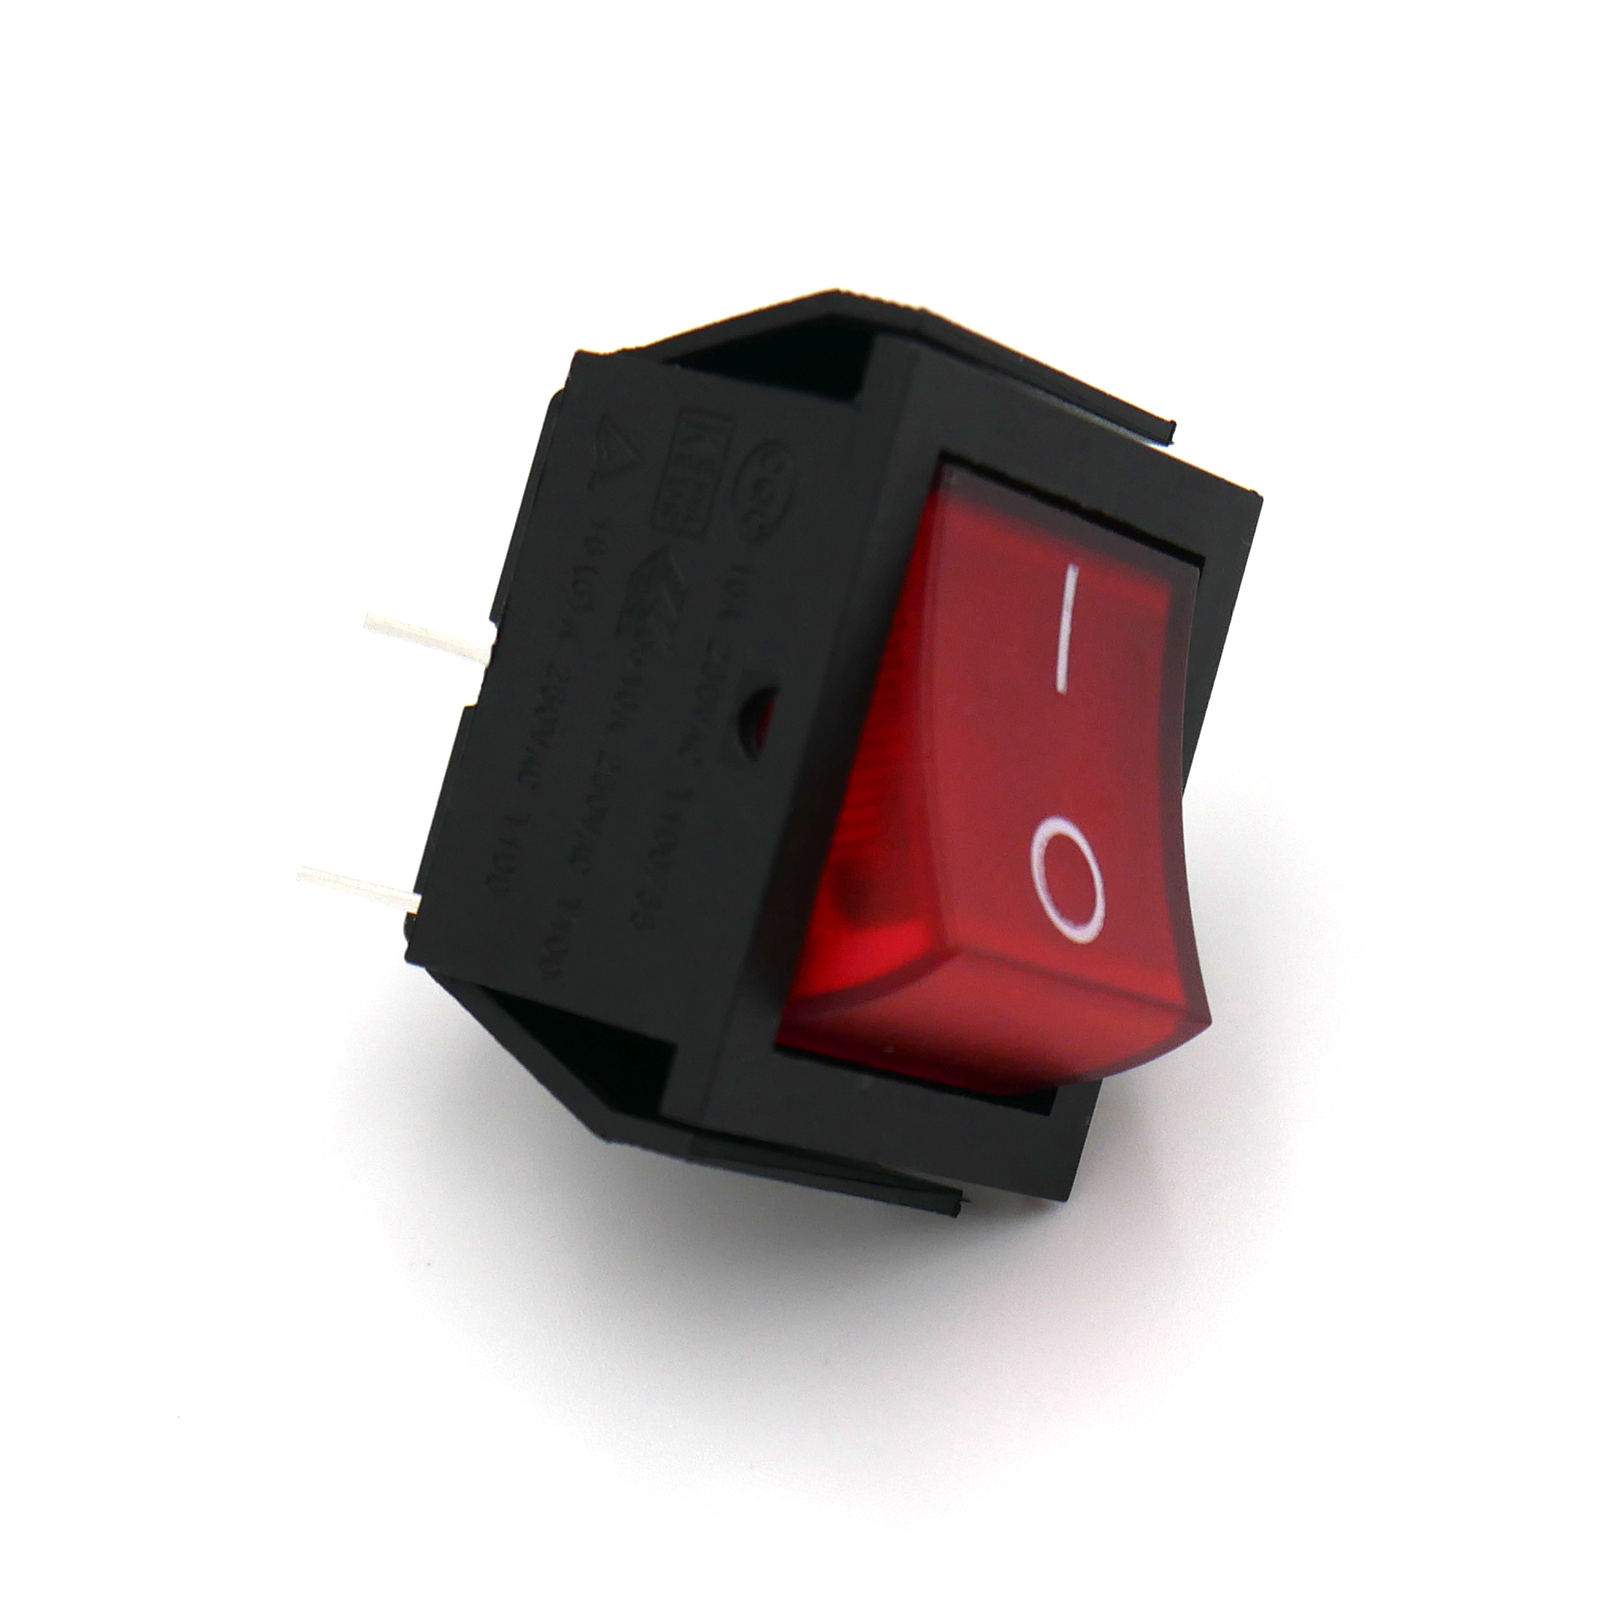 Red rocker switch used for power control on/off  compatible with various packaging machines